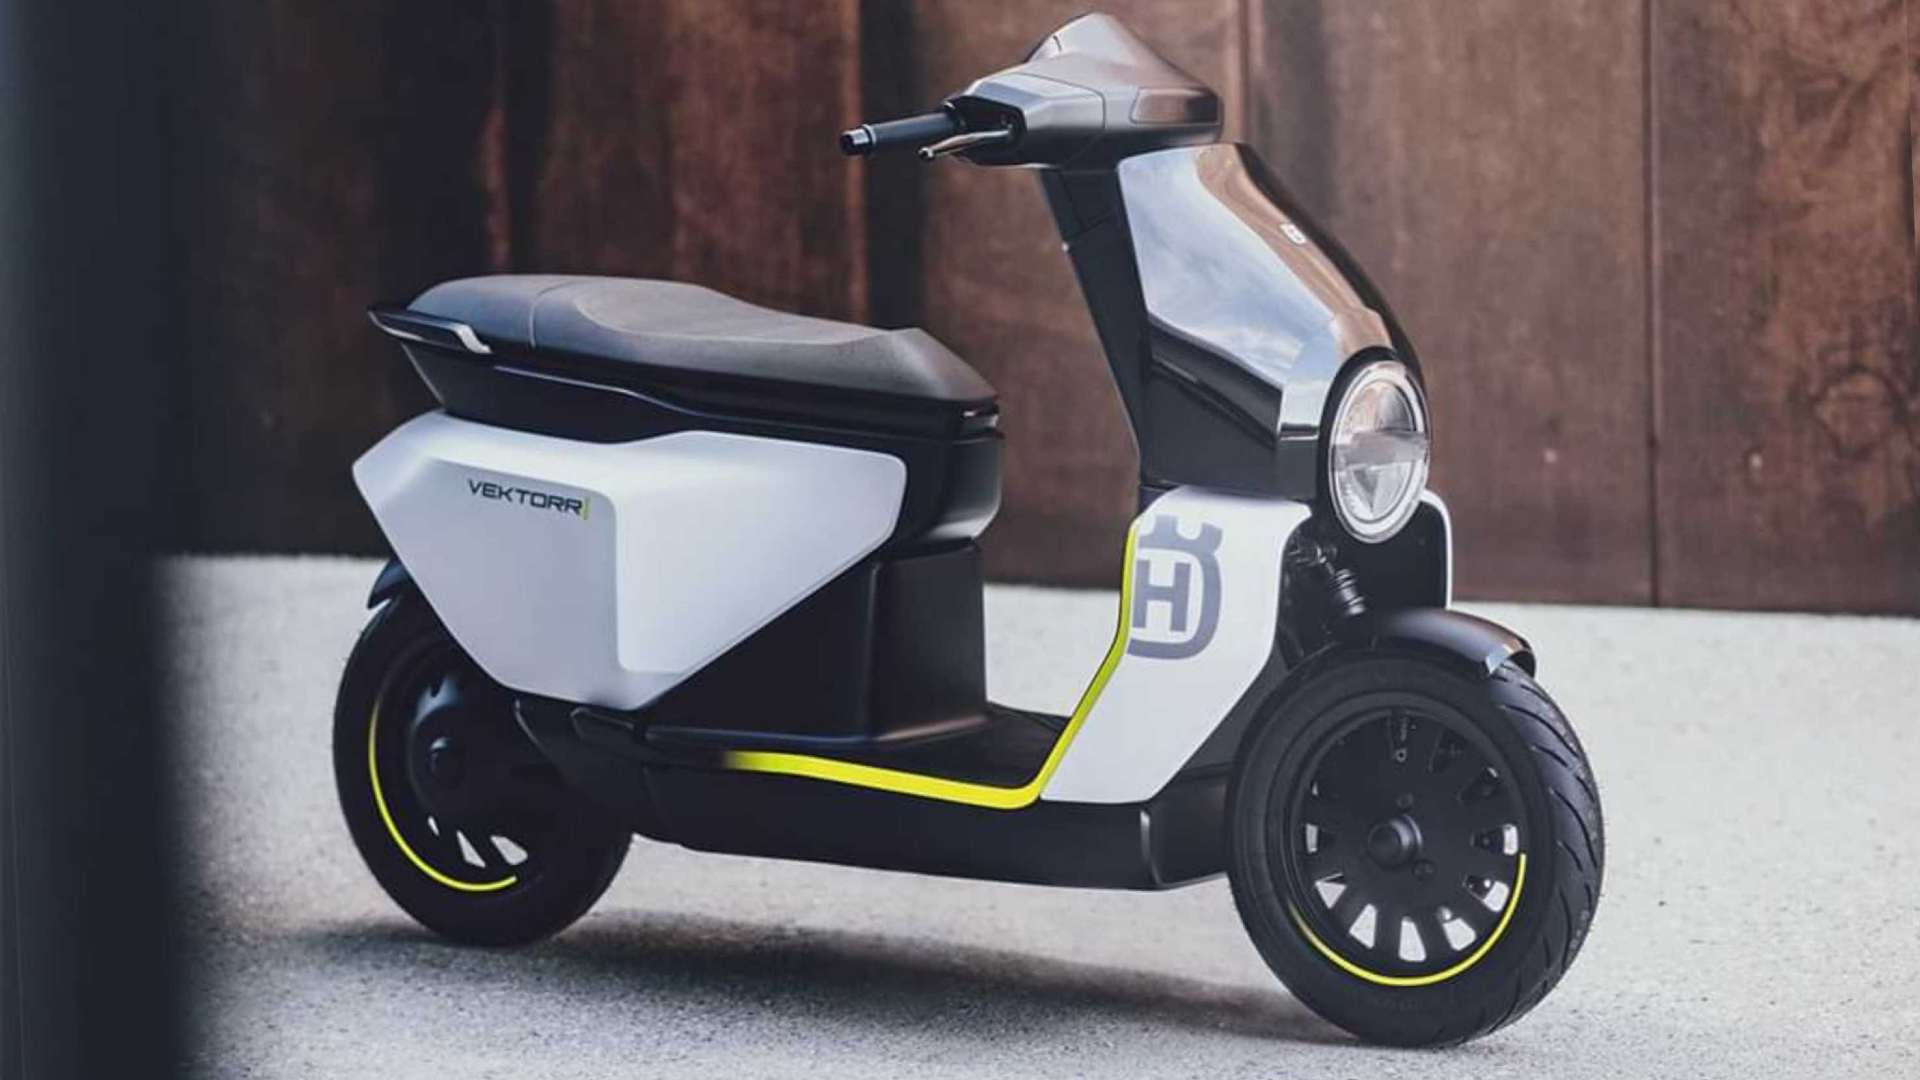 The Vektorr is Husqvarna's first-ever attempt at making an electric scooter. Image: Husqvarna